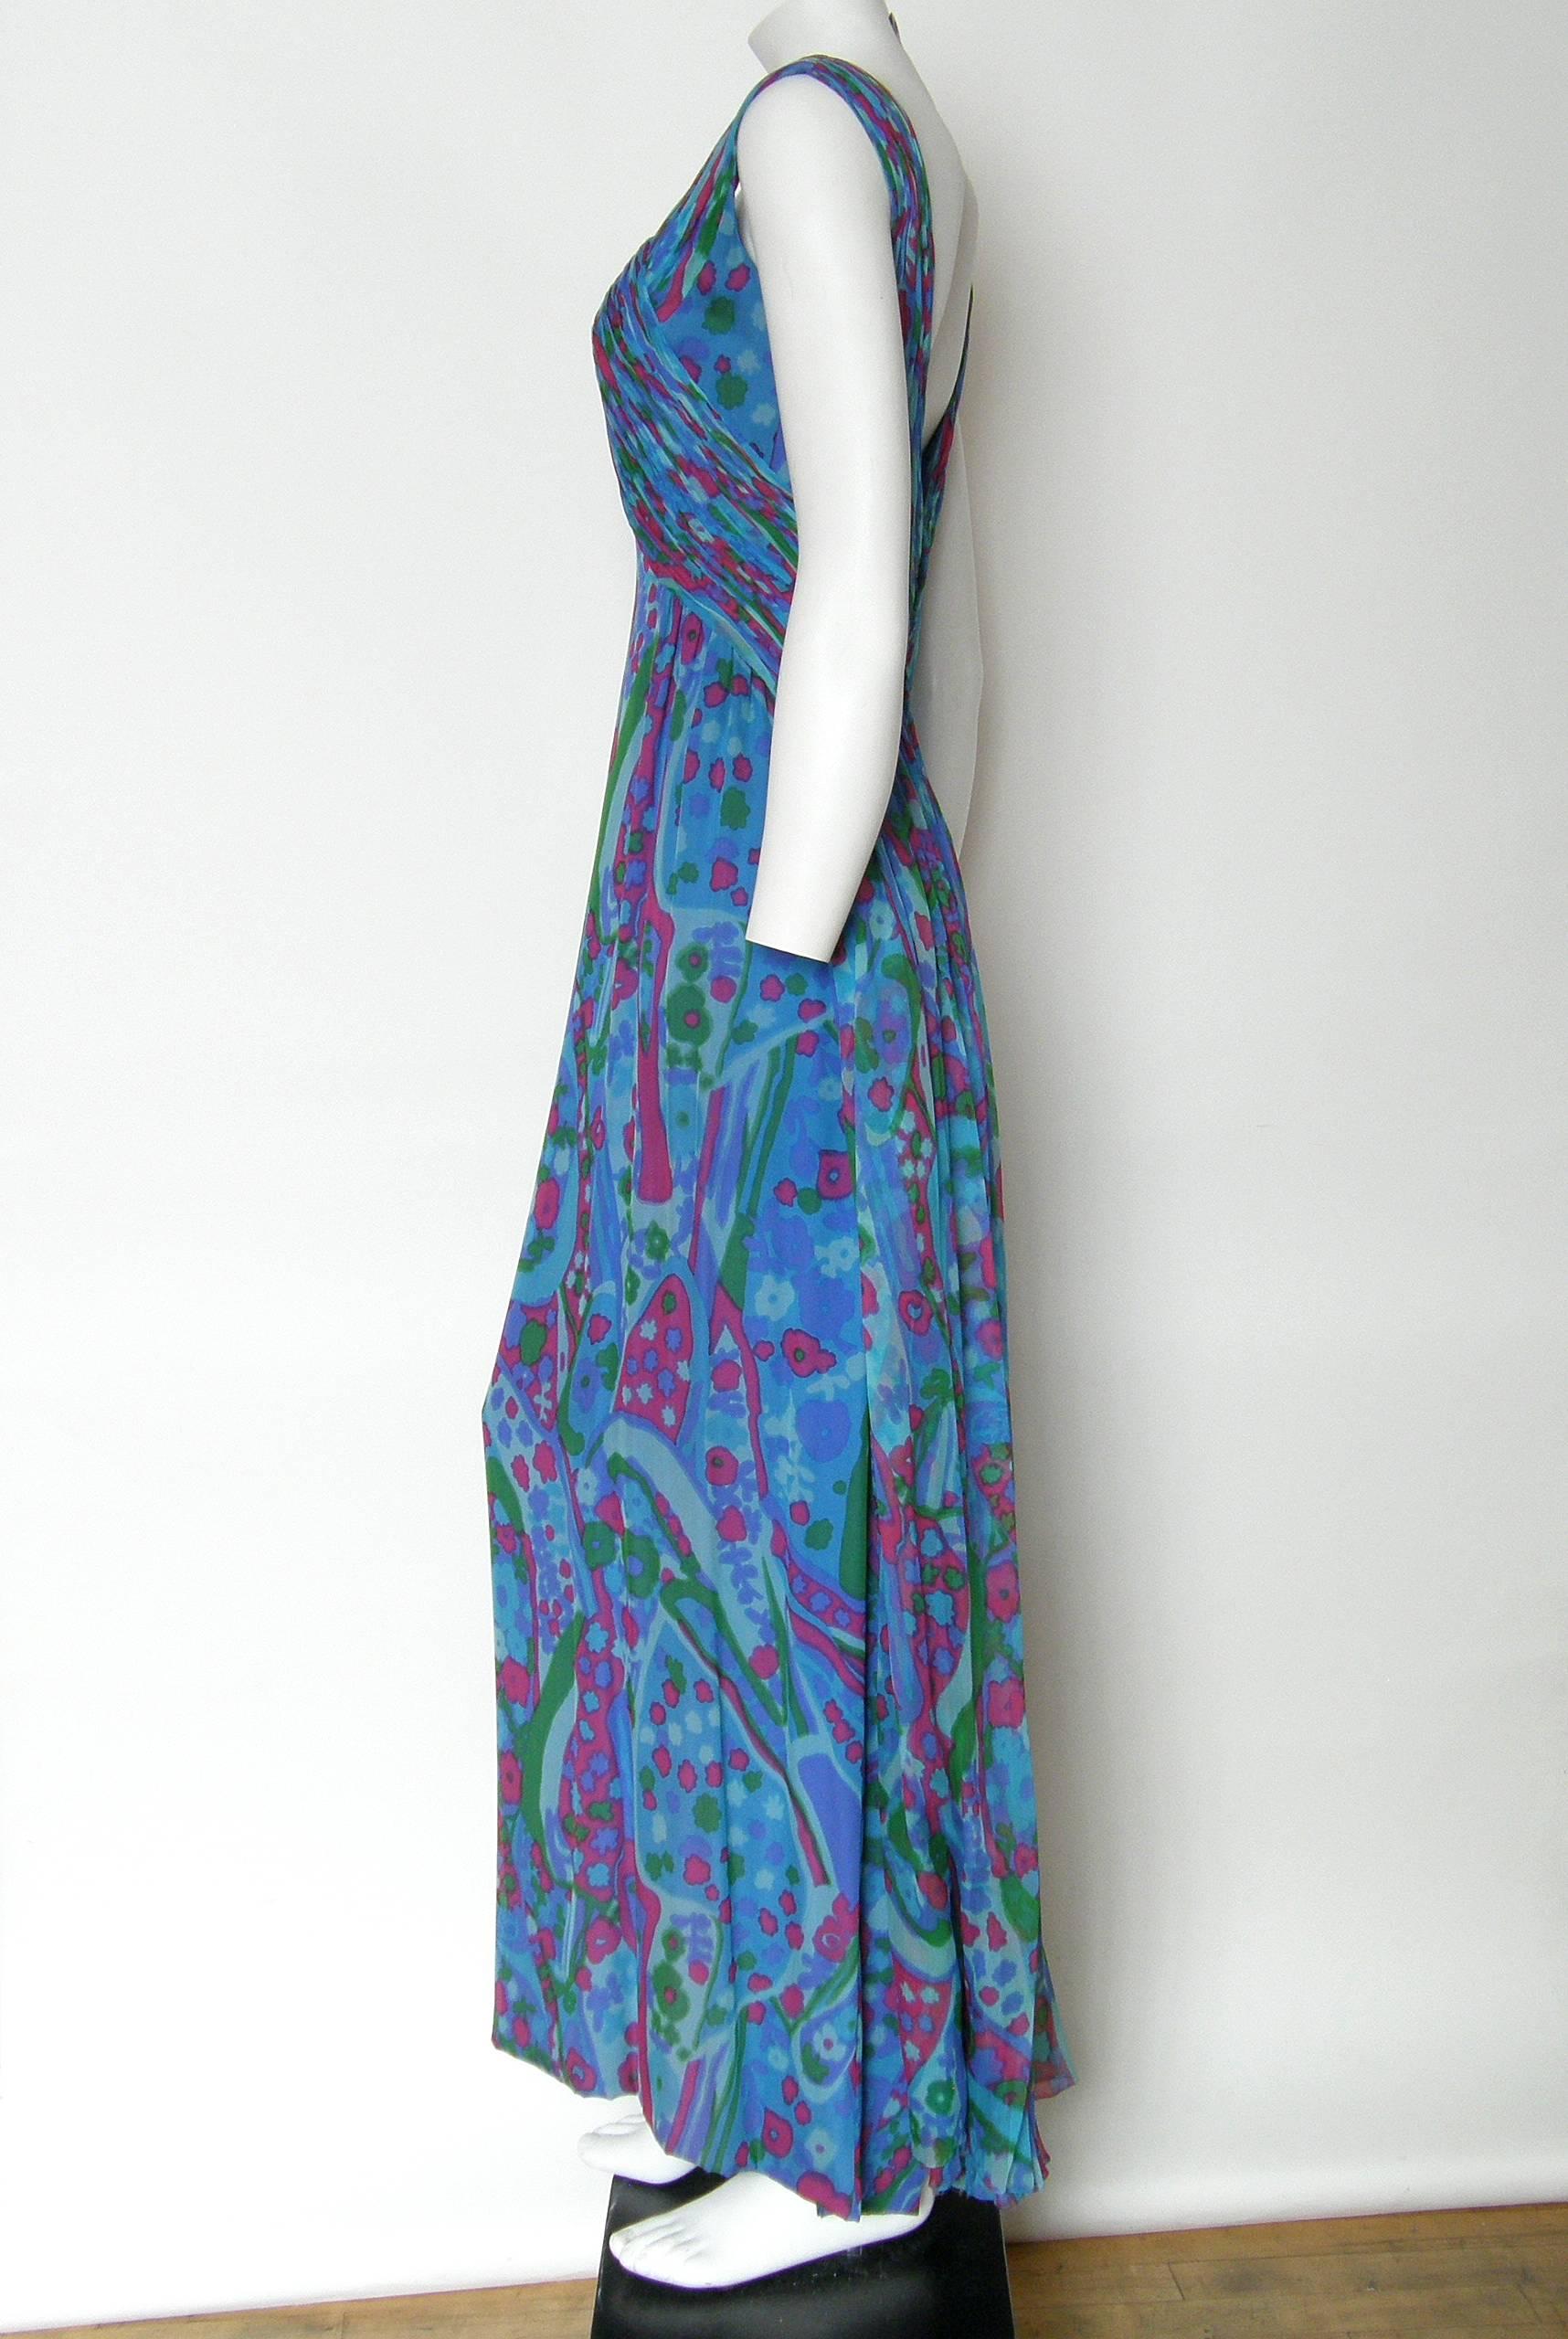 1960s Sleeveless Evening Dress by Gothé in Colorful Floral Silk Chiffon ...